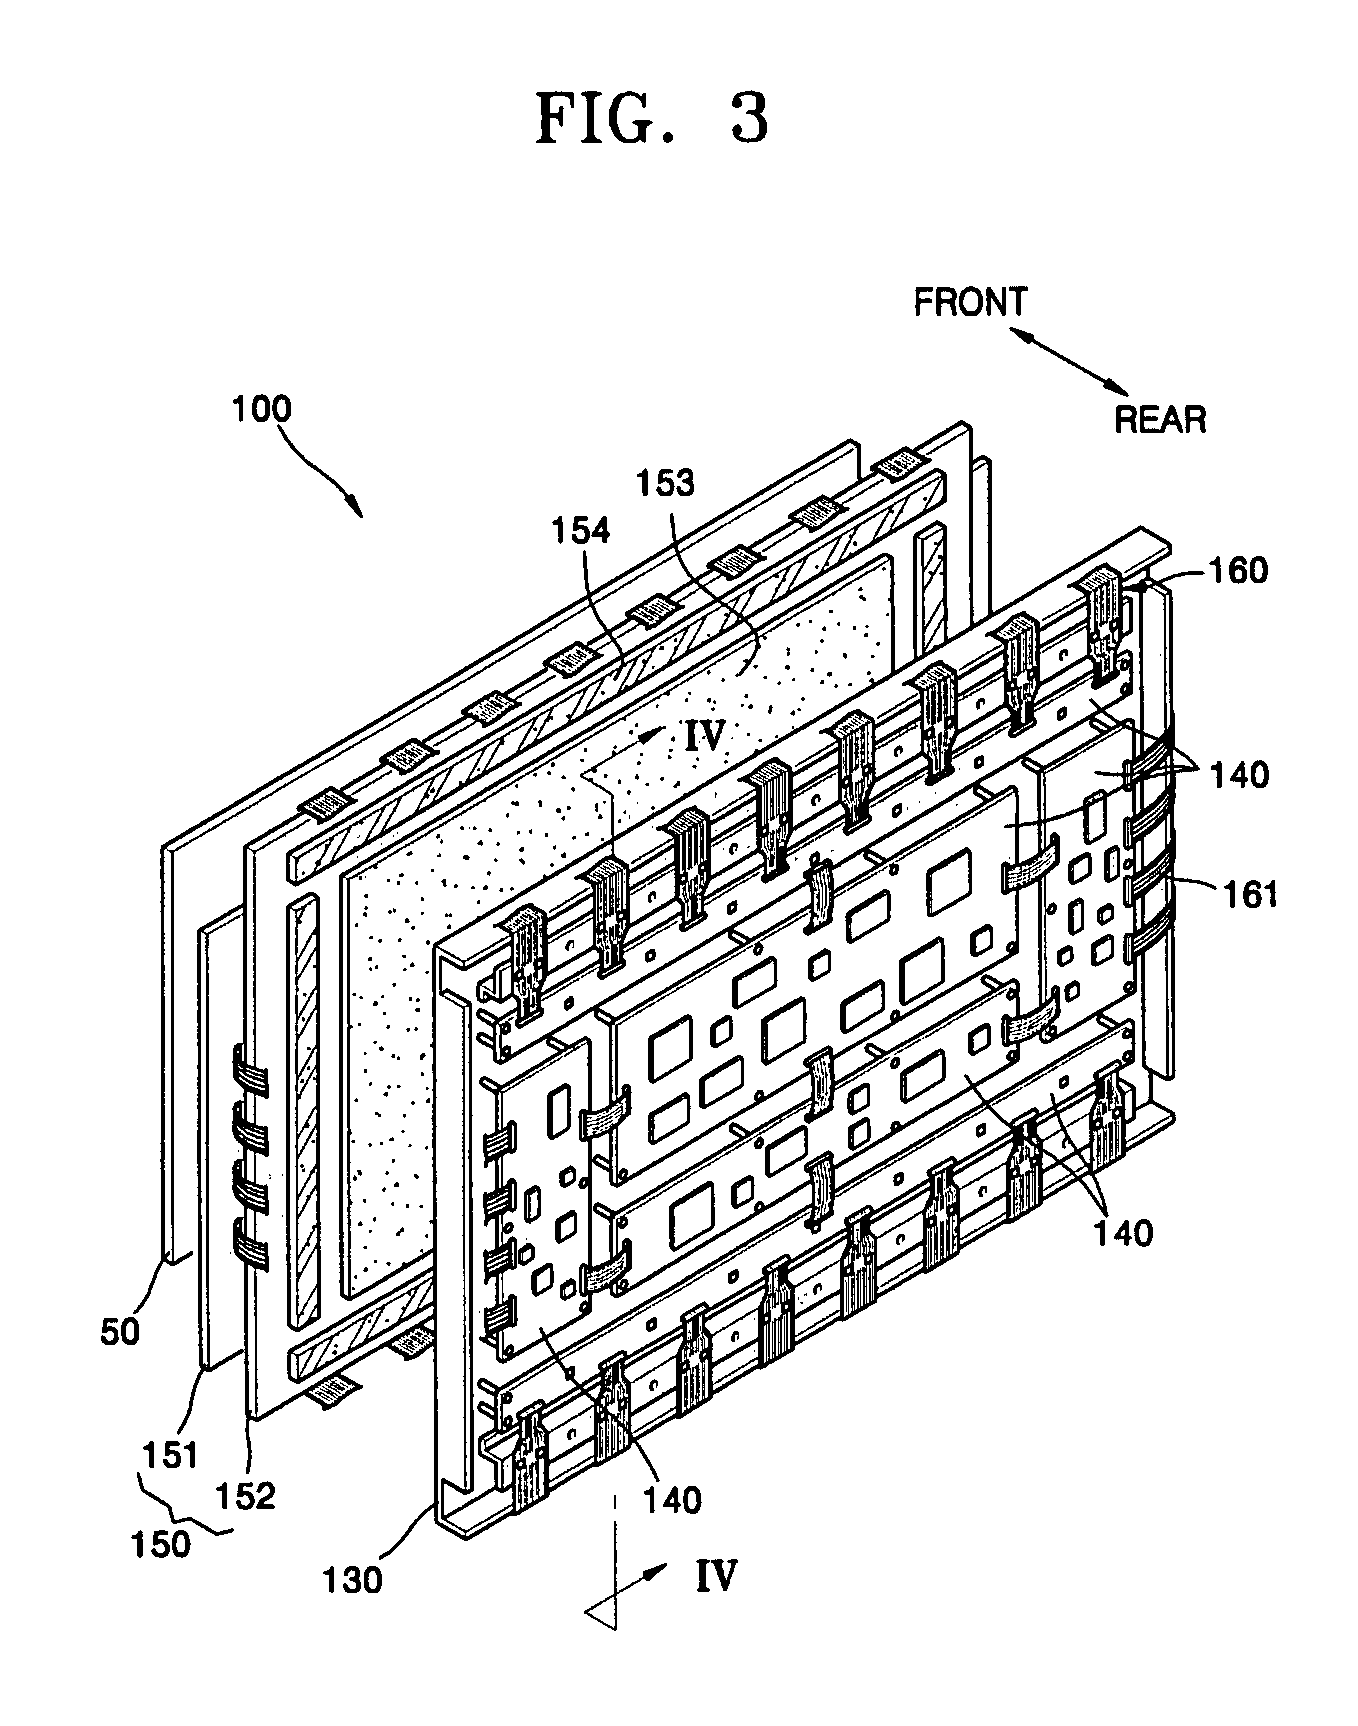 Filter and display apparatus having the same